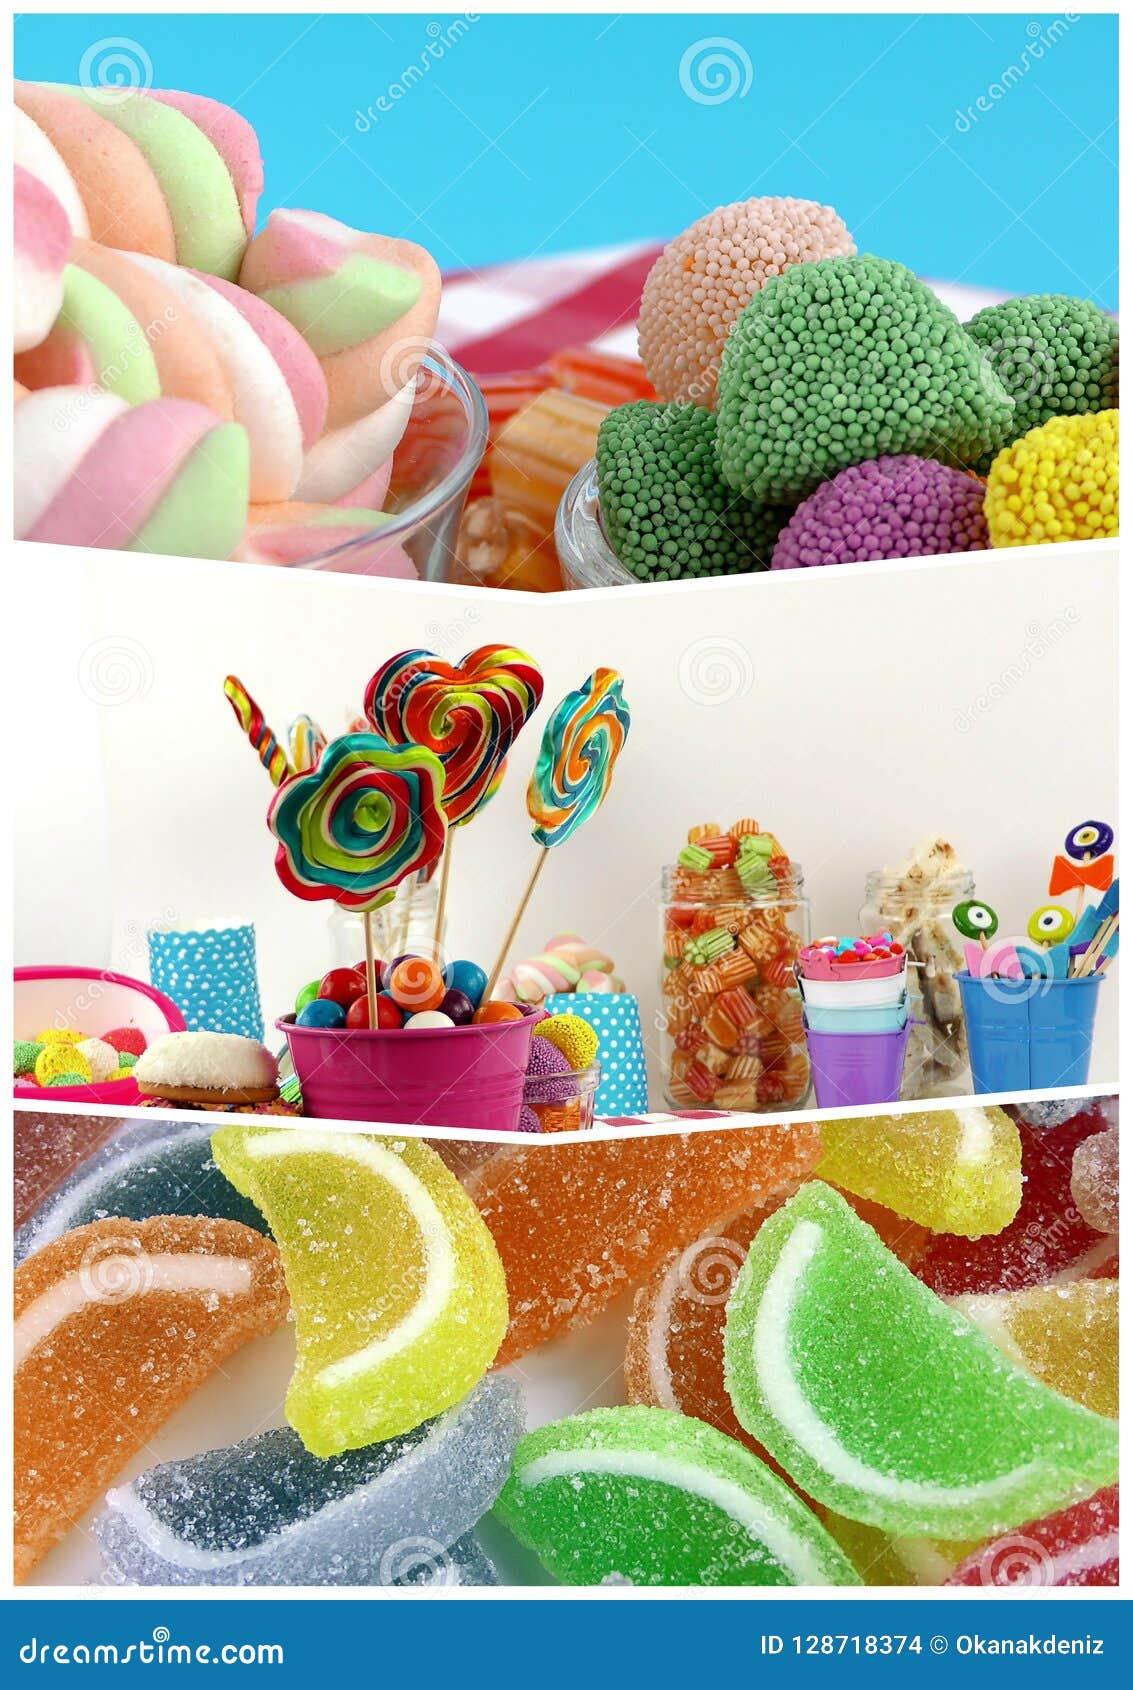 Candy Sweet Lolly Sugary Collage Stock Photo Image Of Bonbon Round